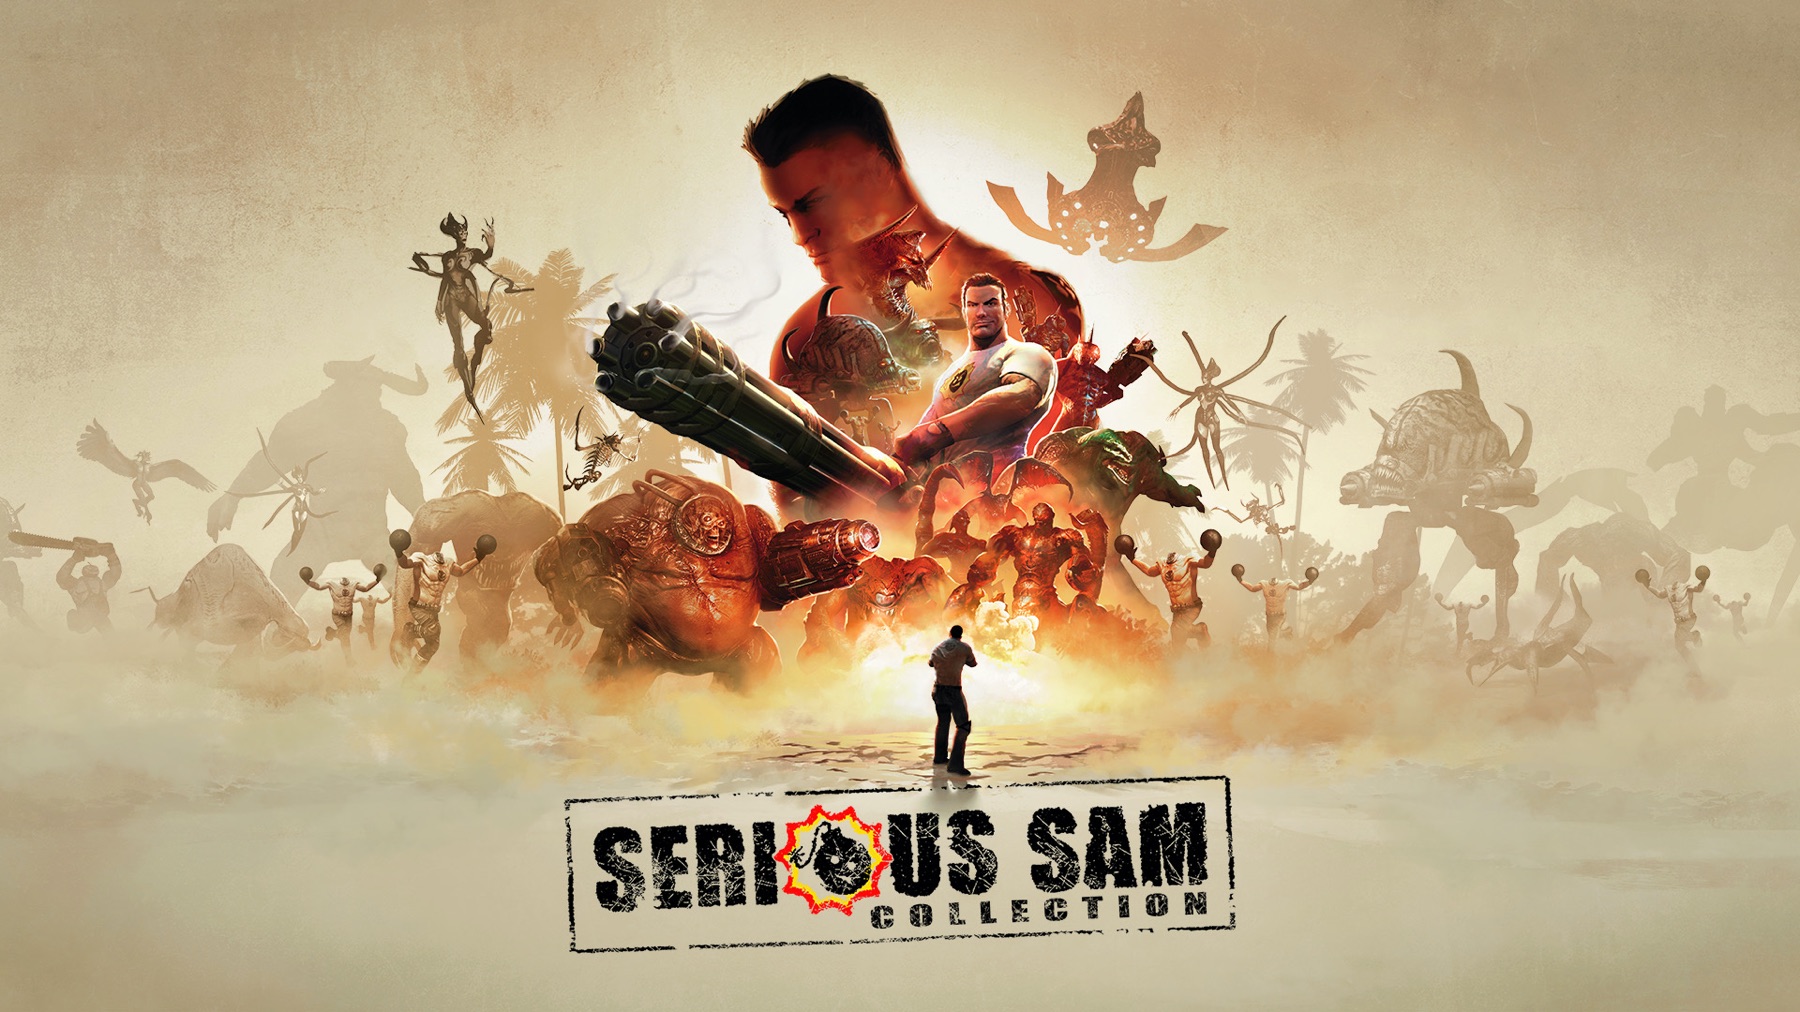 Serious Sam Collection 11 10 20 1